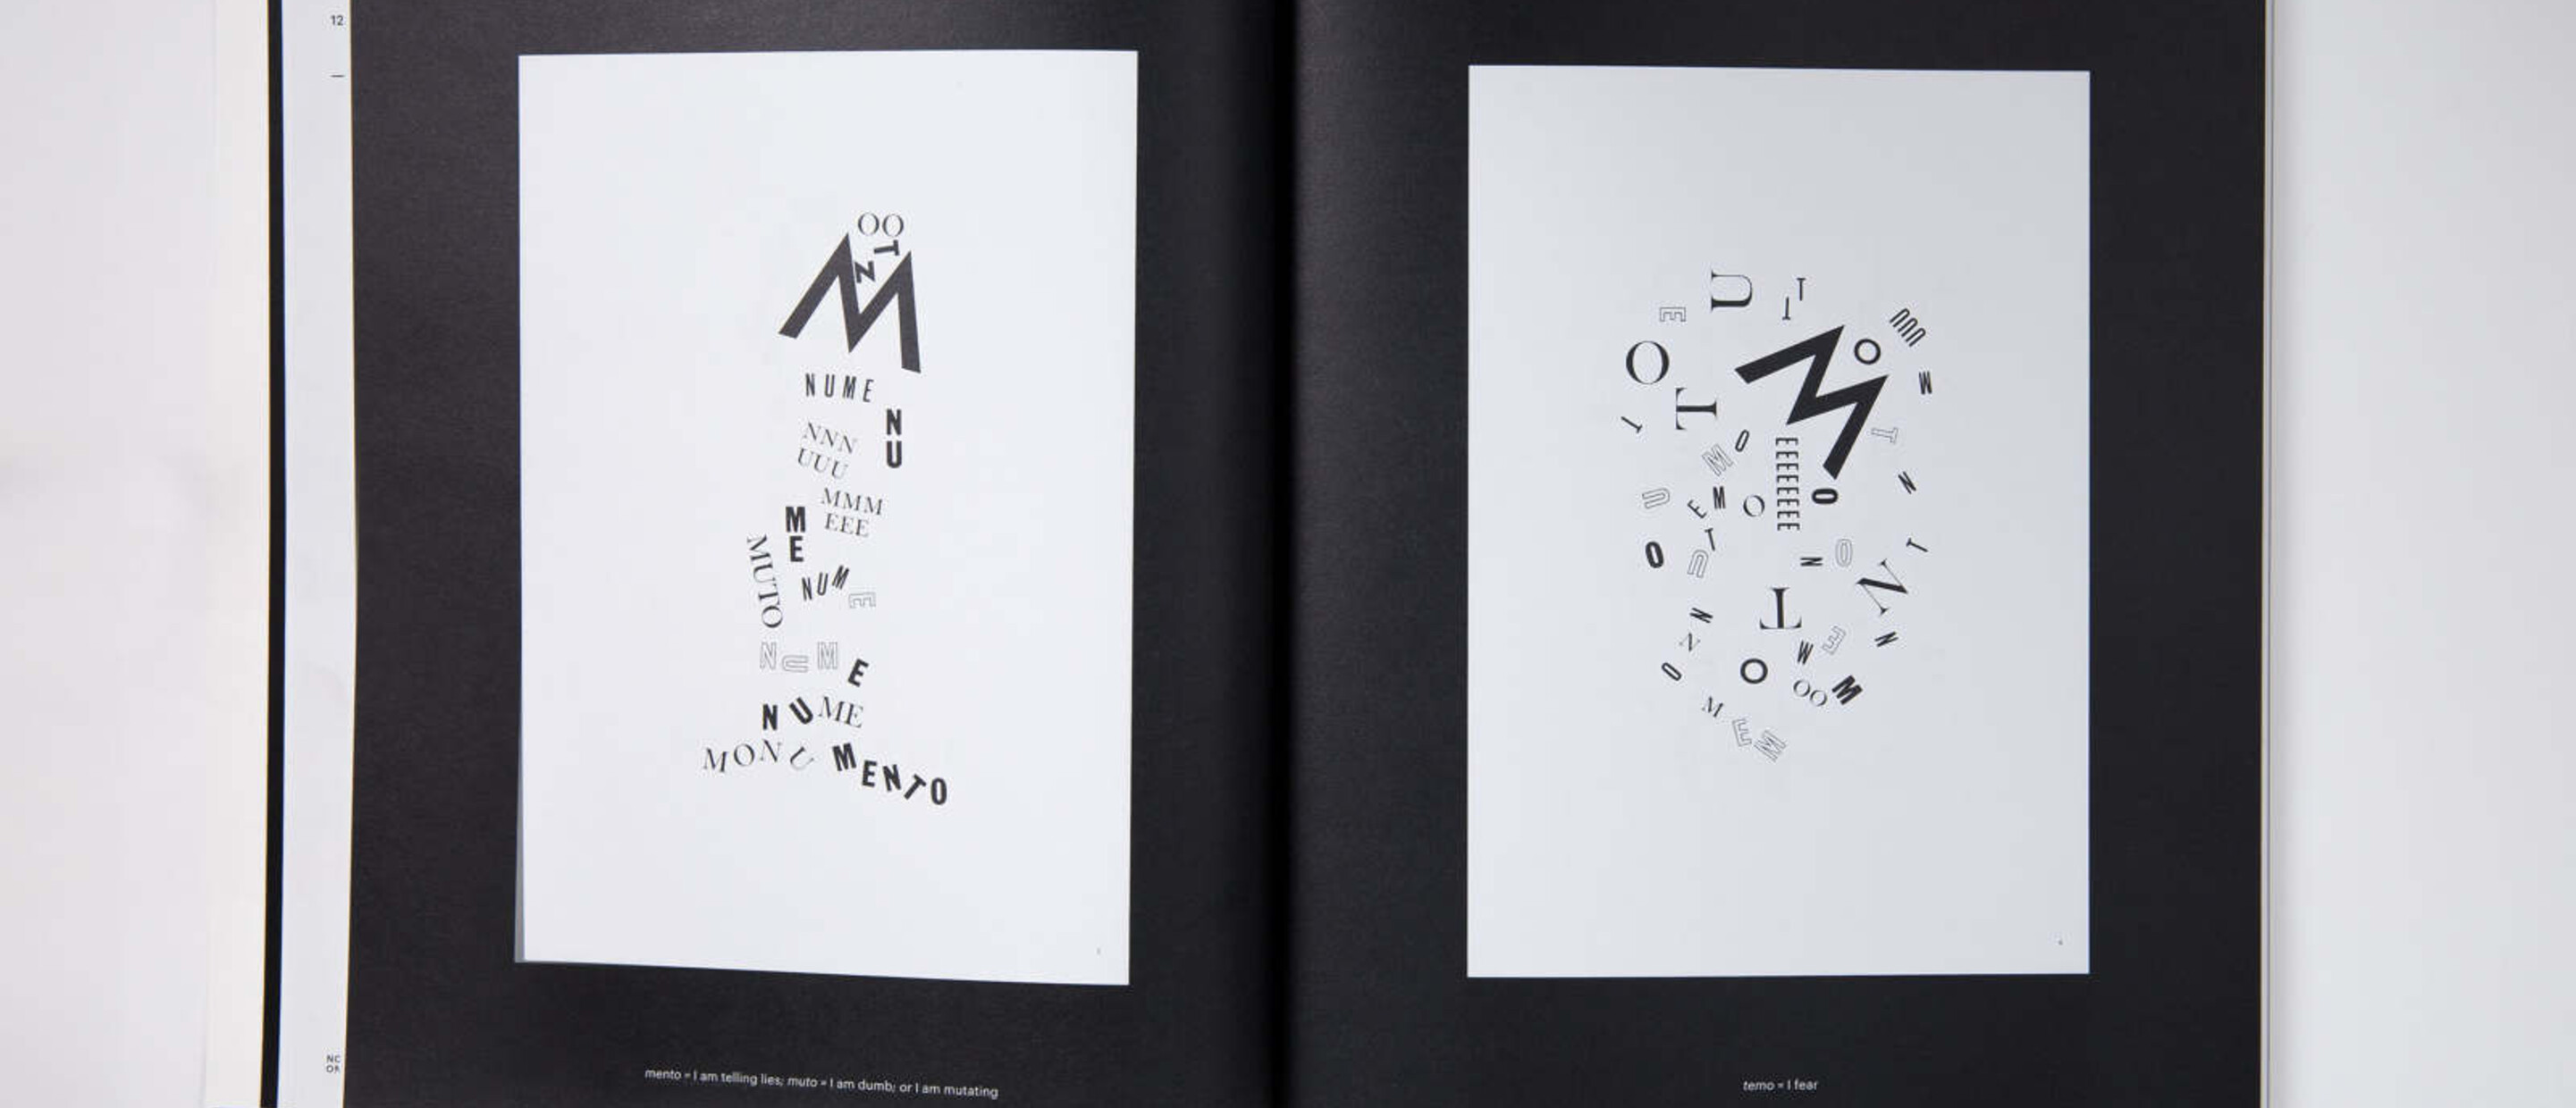 Catalogue spread showing letters arranged in visual poetry